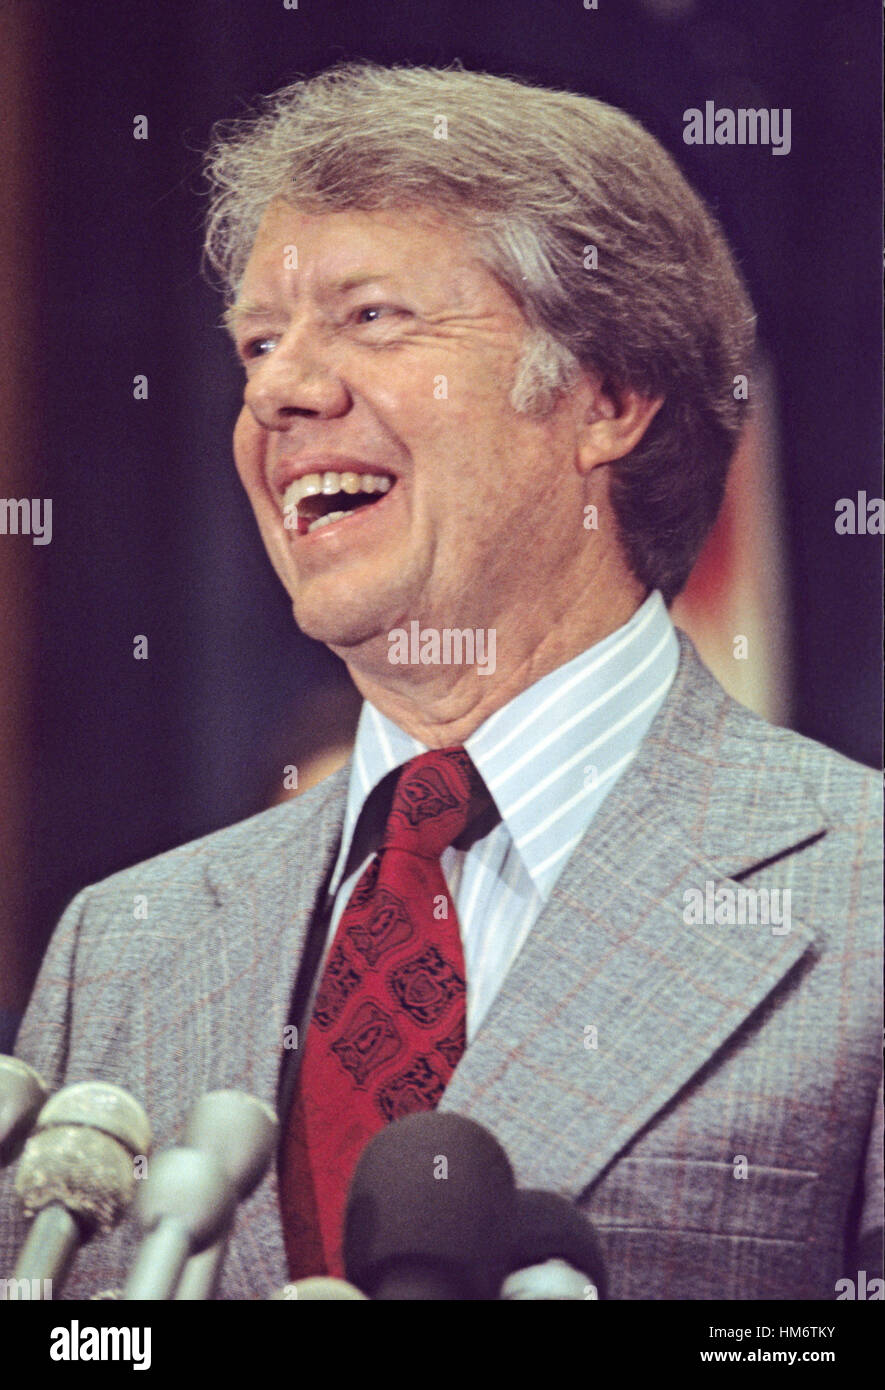 Governor Jimmy Carter (Democrat of Georgia), a candidate for the 1976 Democratic nomination for President of the United States, speaks before US House members and employees in the Rayburn House Office Building in Washington, DC on May 15, 1976. Stock Photo